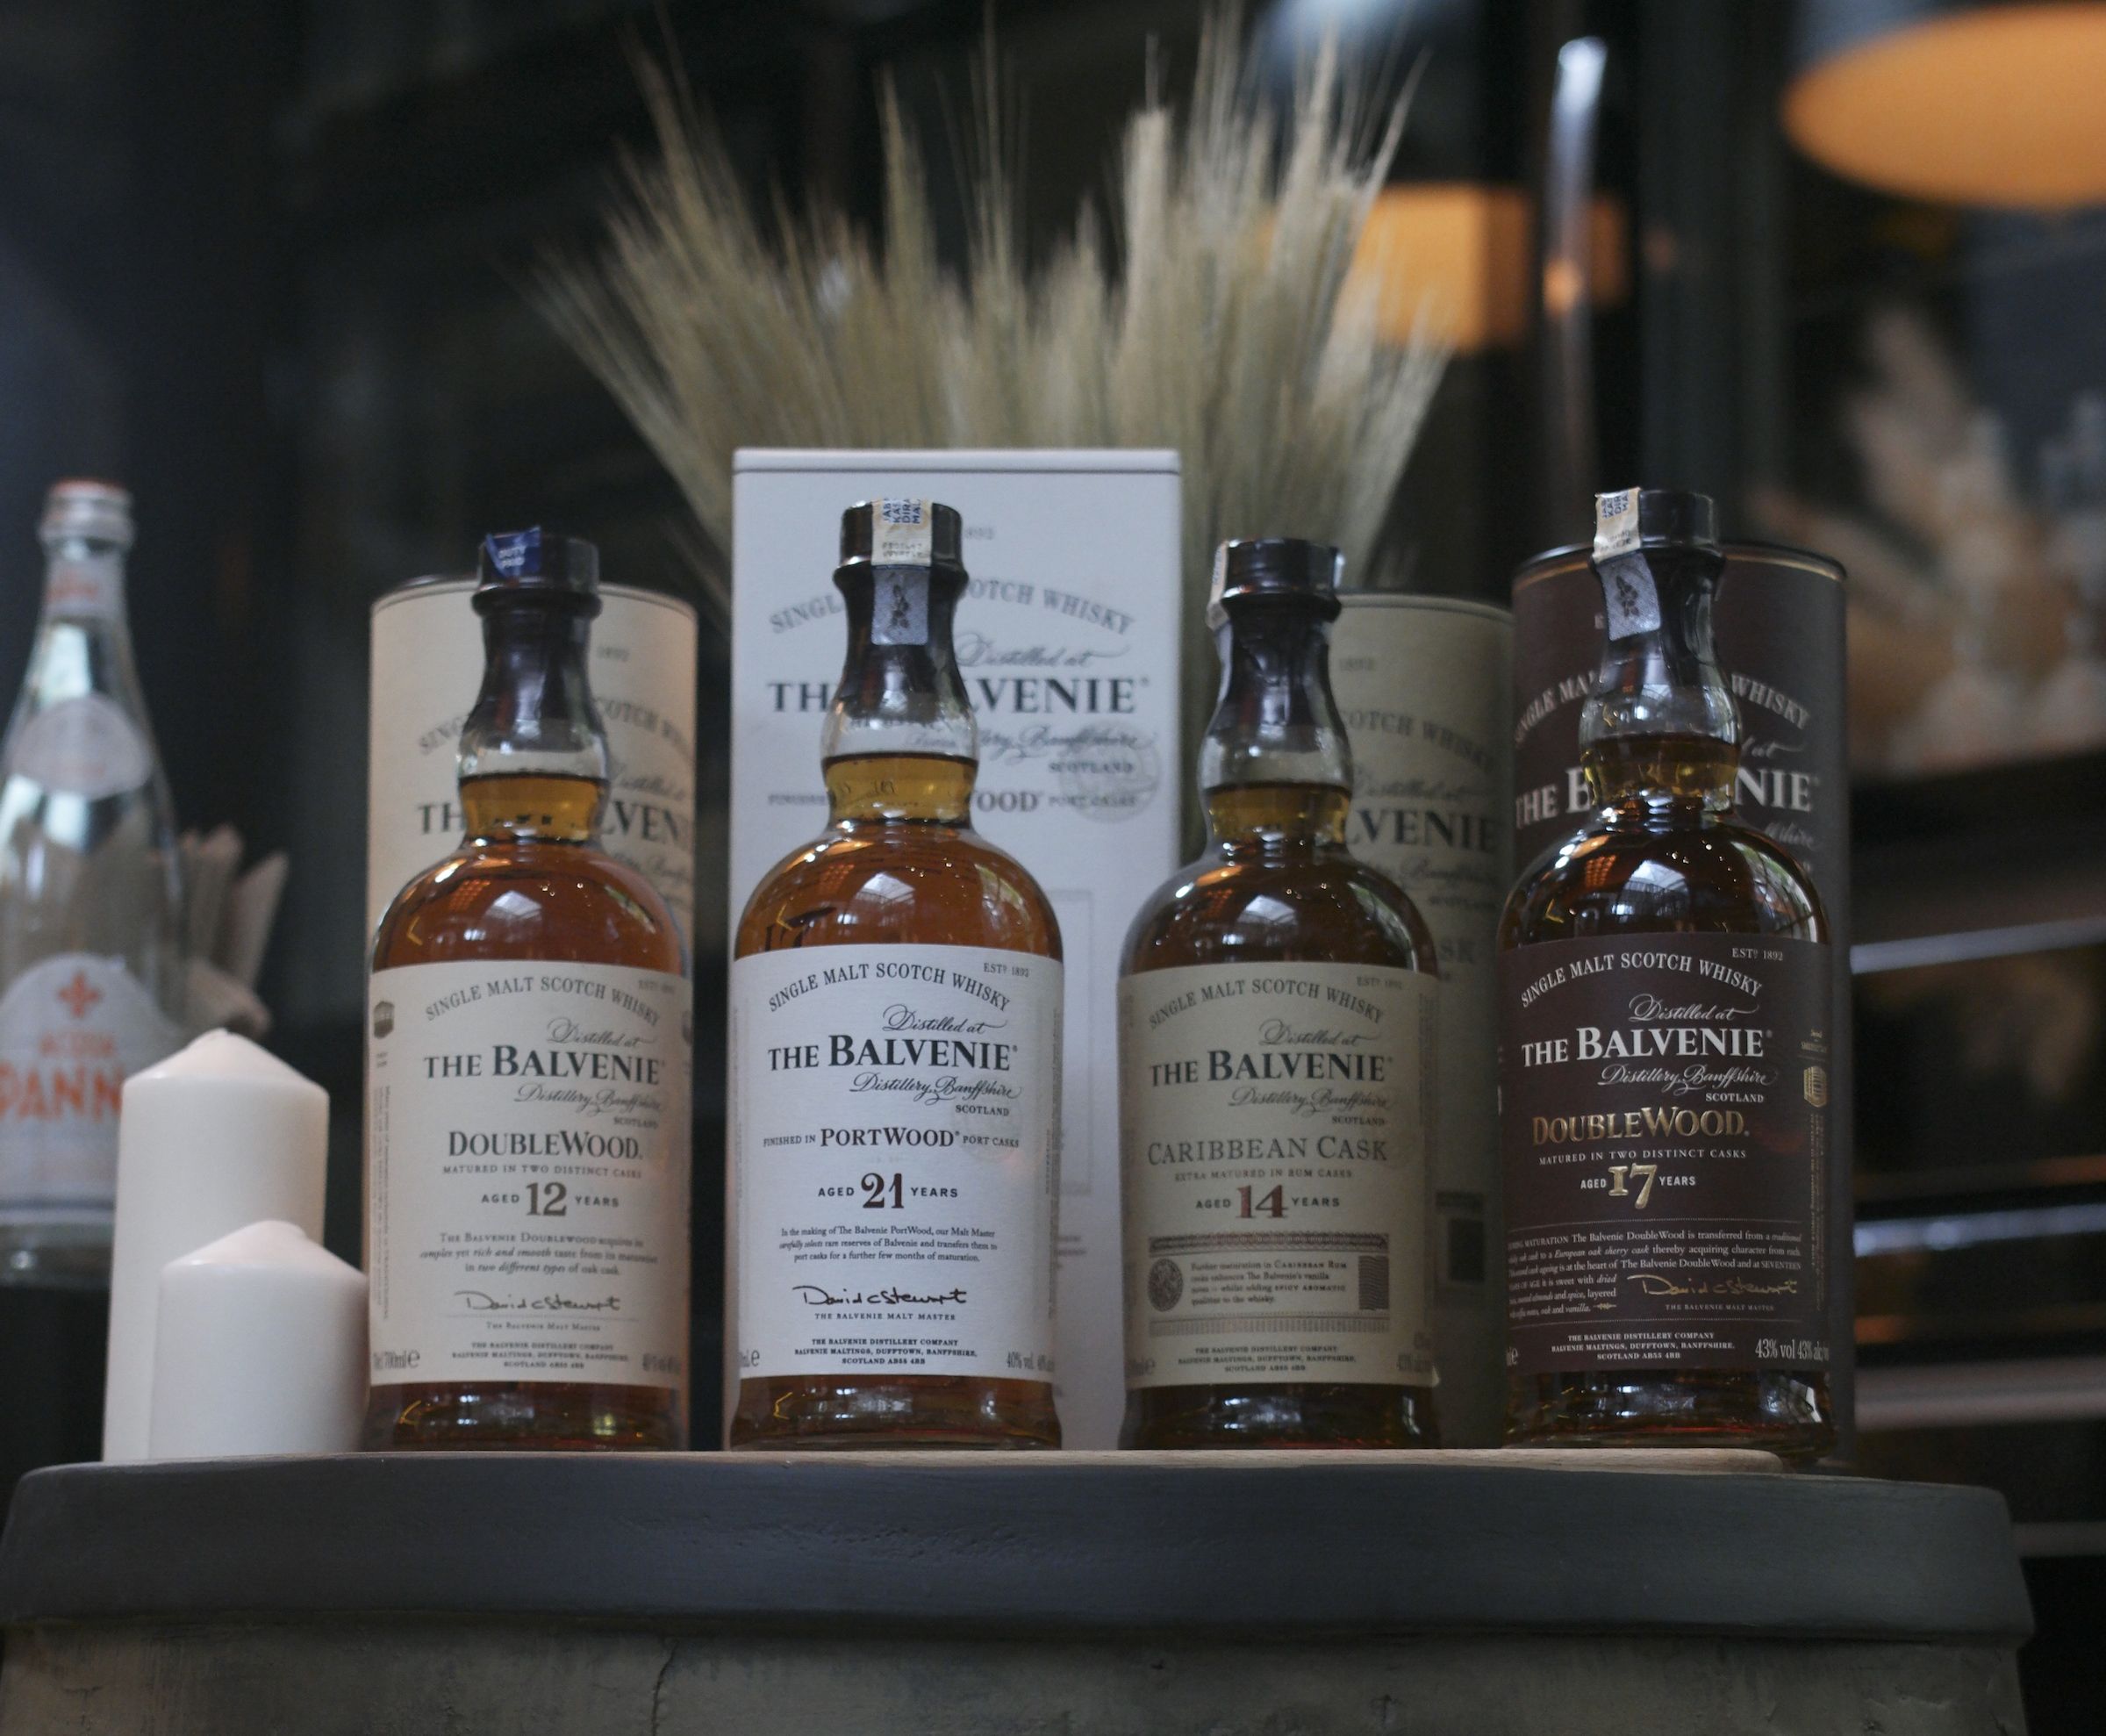 How to pair whisky and cheese, according to James Cordiner, SEA Brand Ambassador for The Balvenie